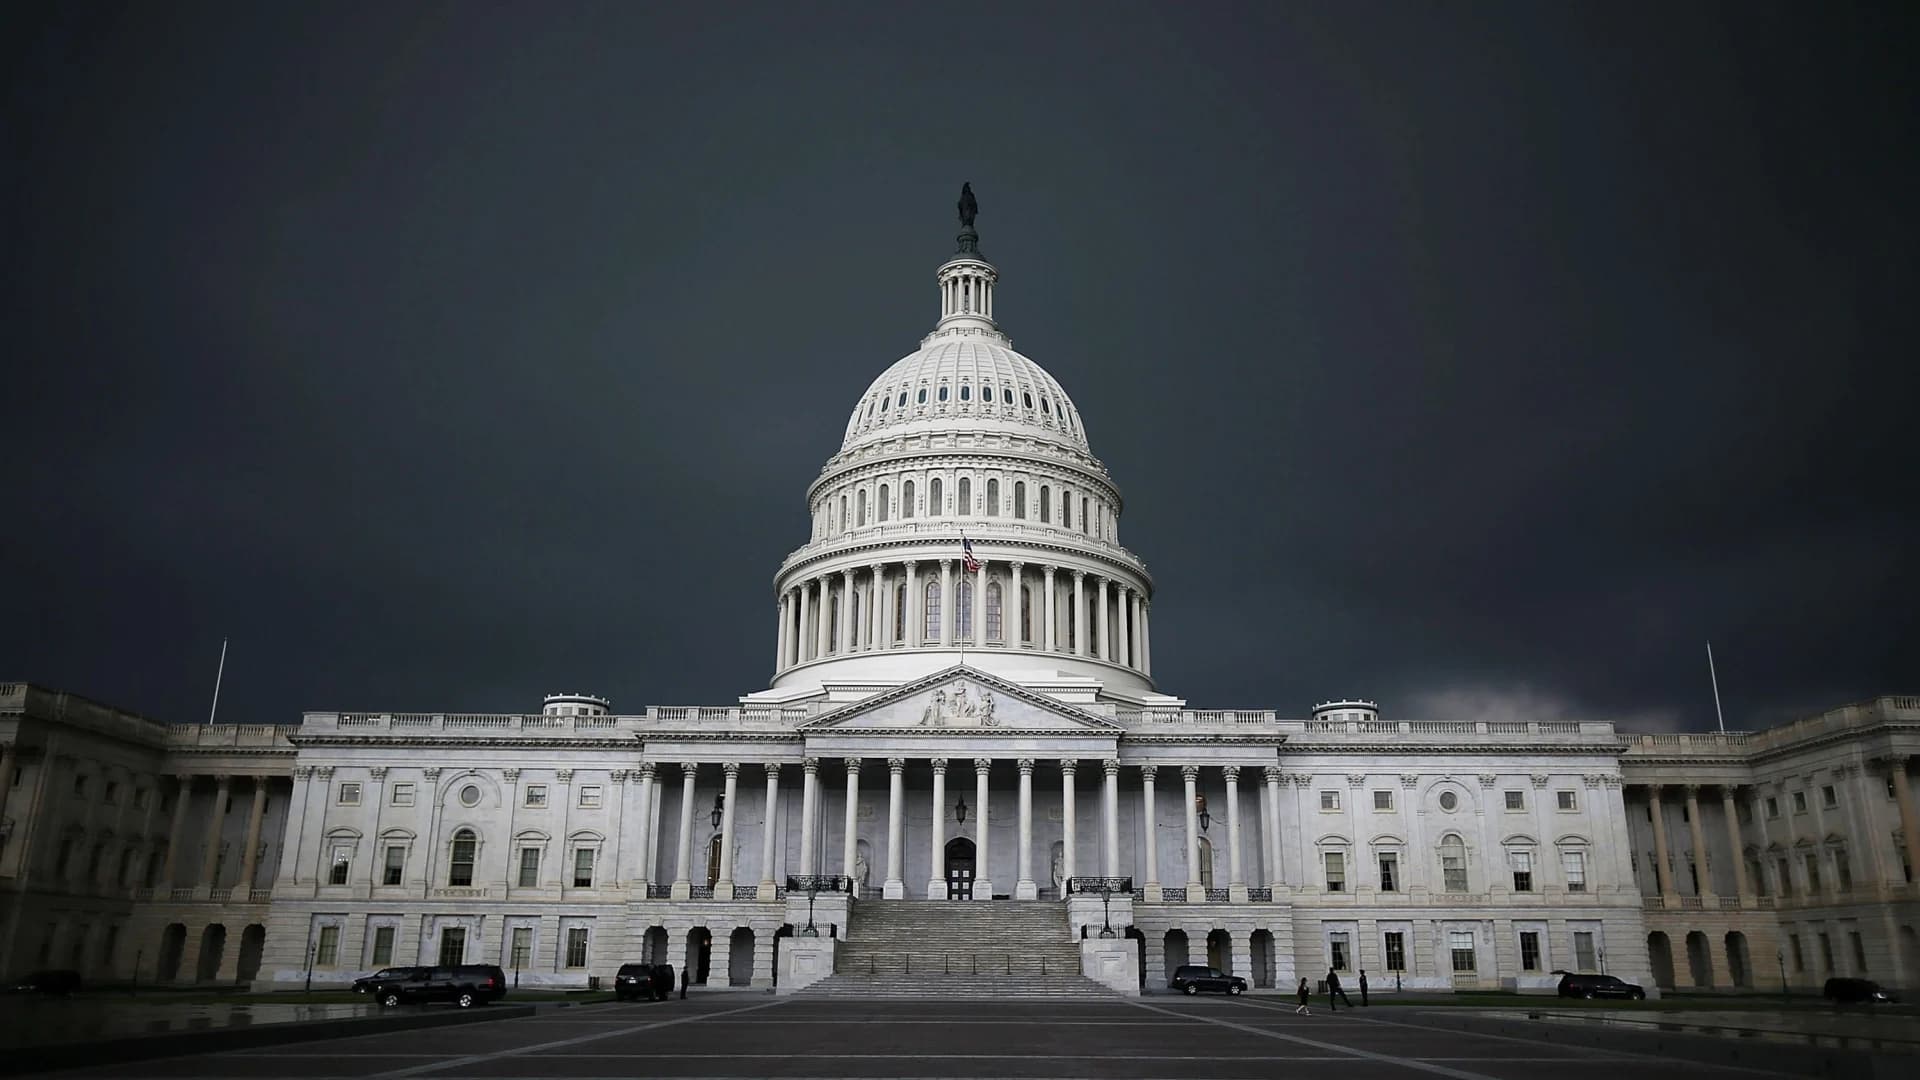 The shutdown today: Donors look to ease pain of shutdown